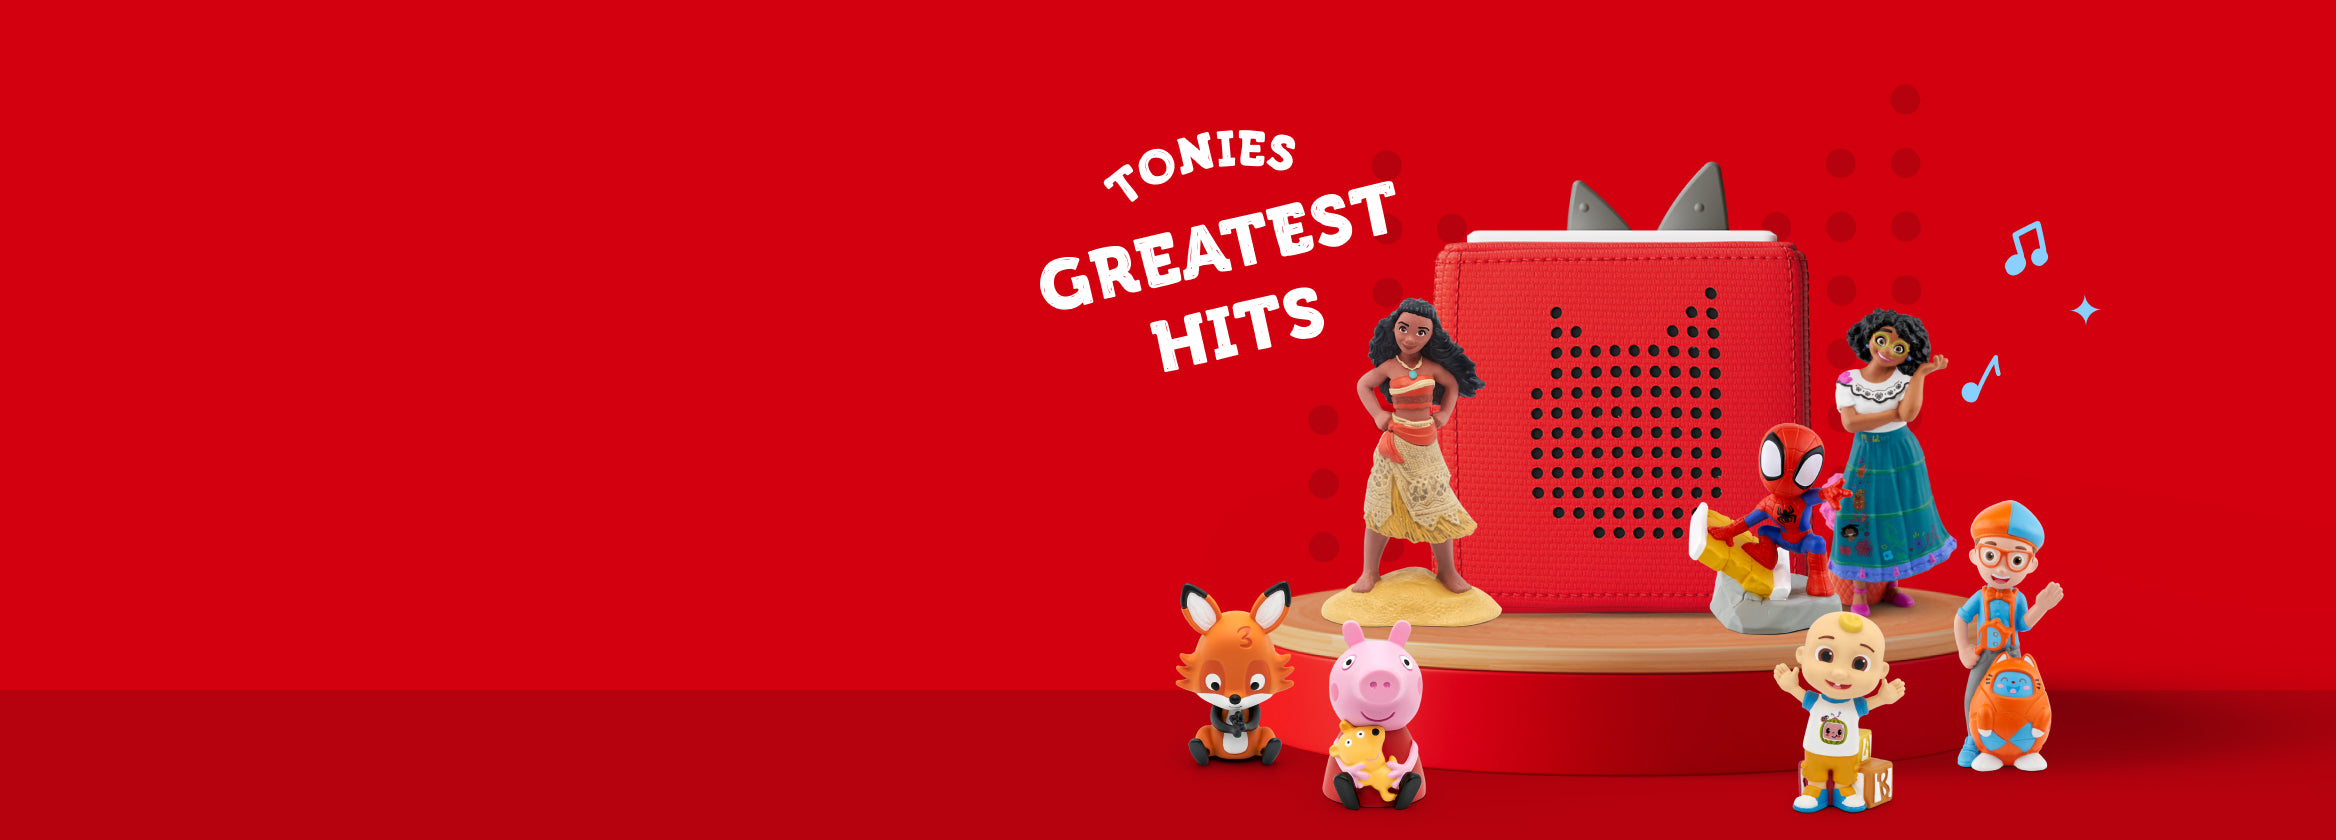 Greatest Hits Tonies and a red toniebox